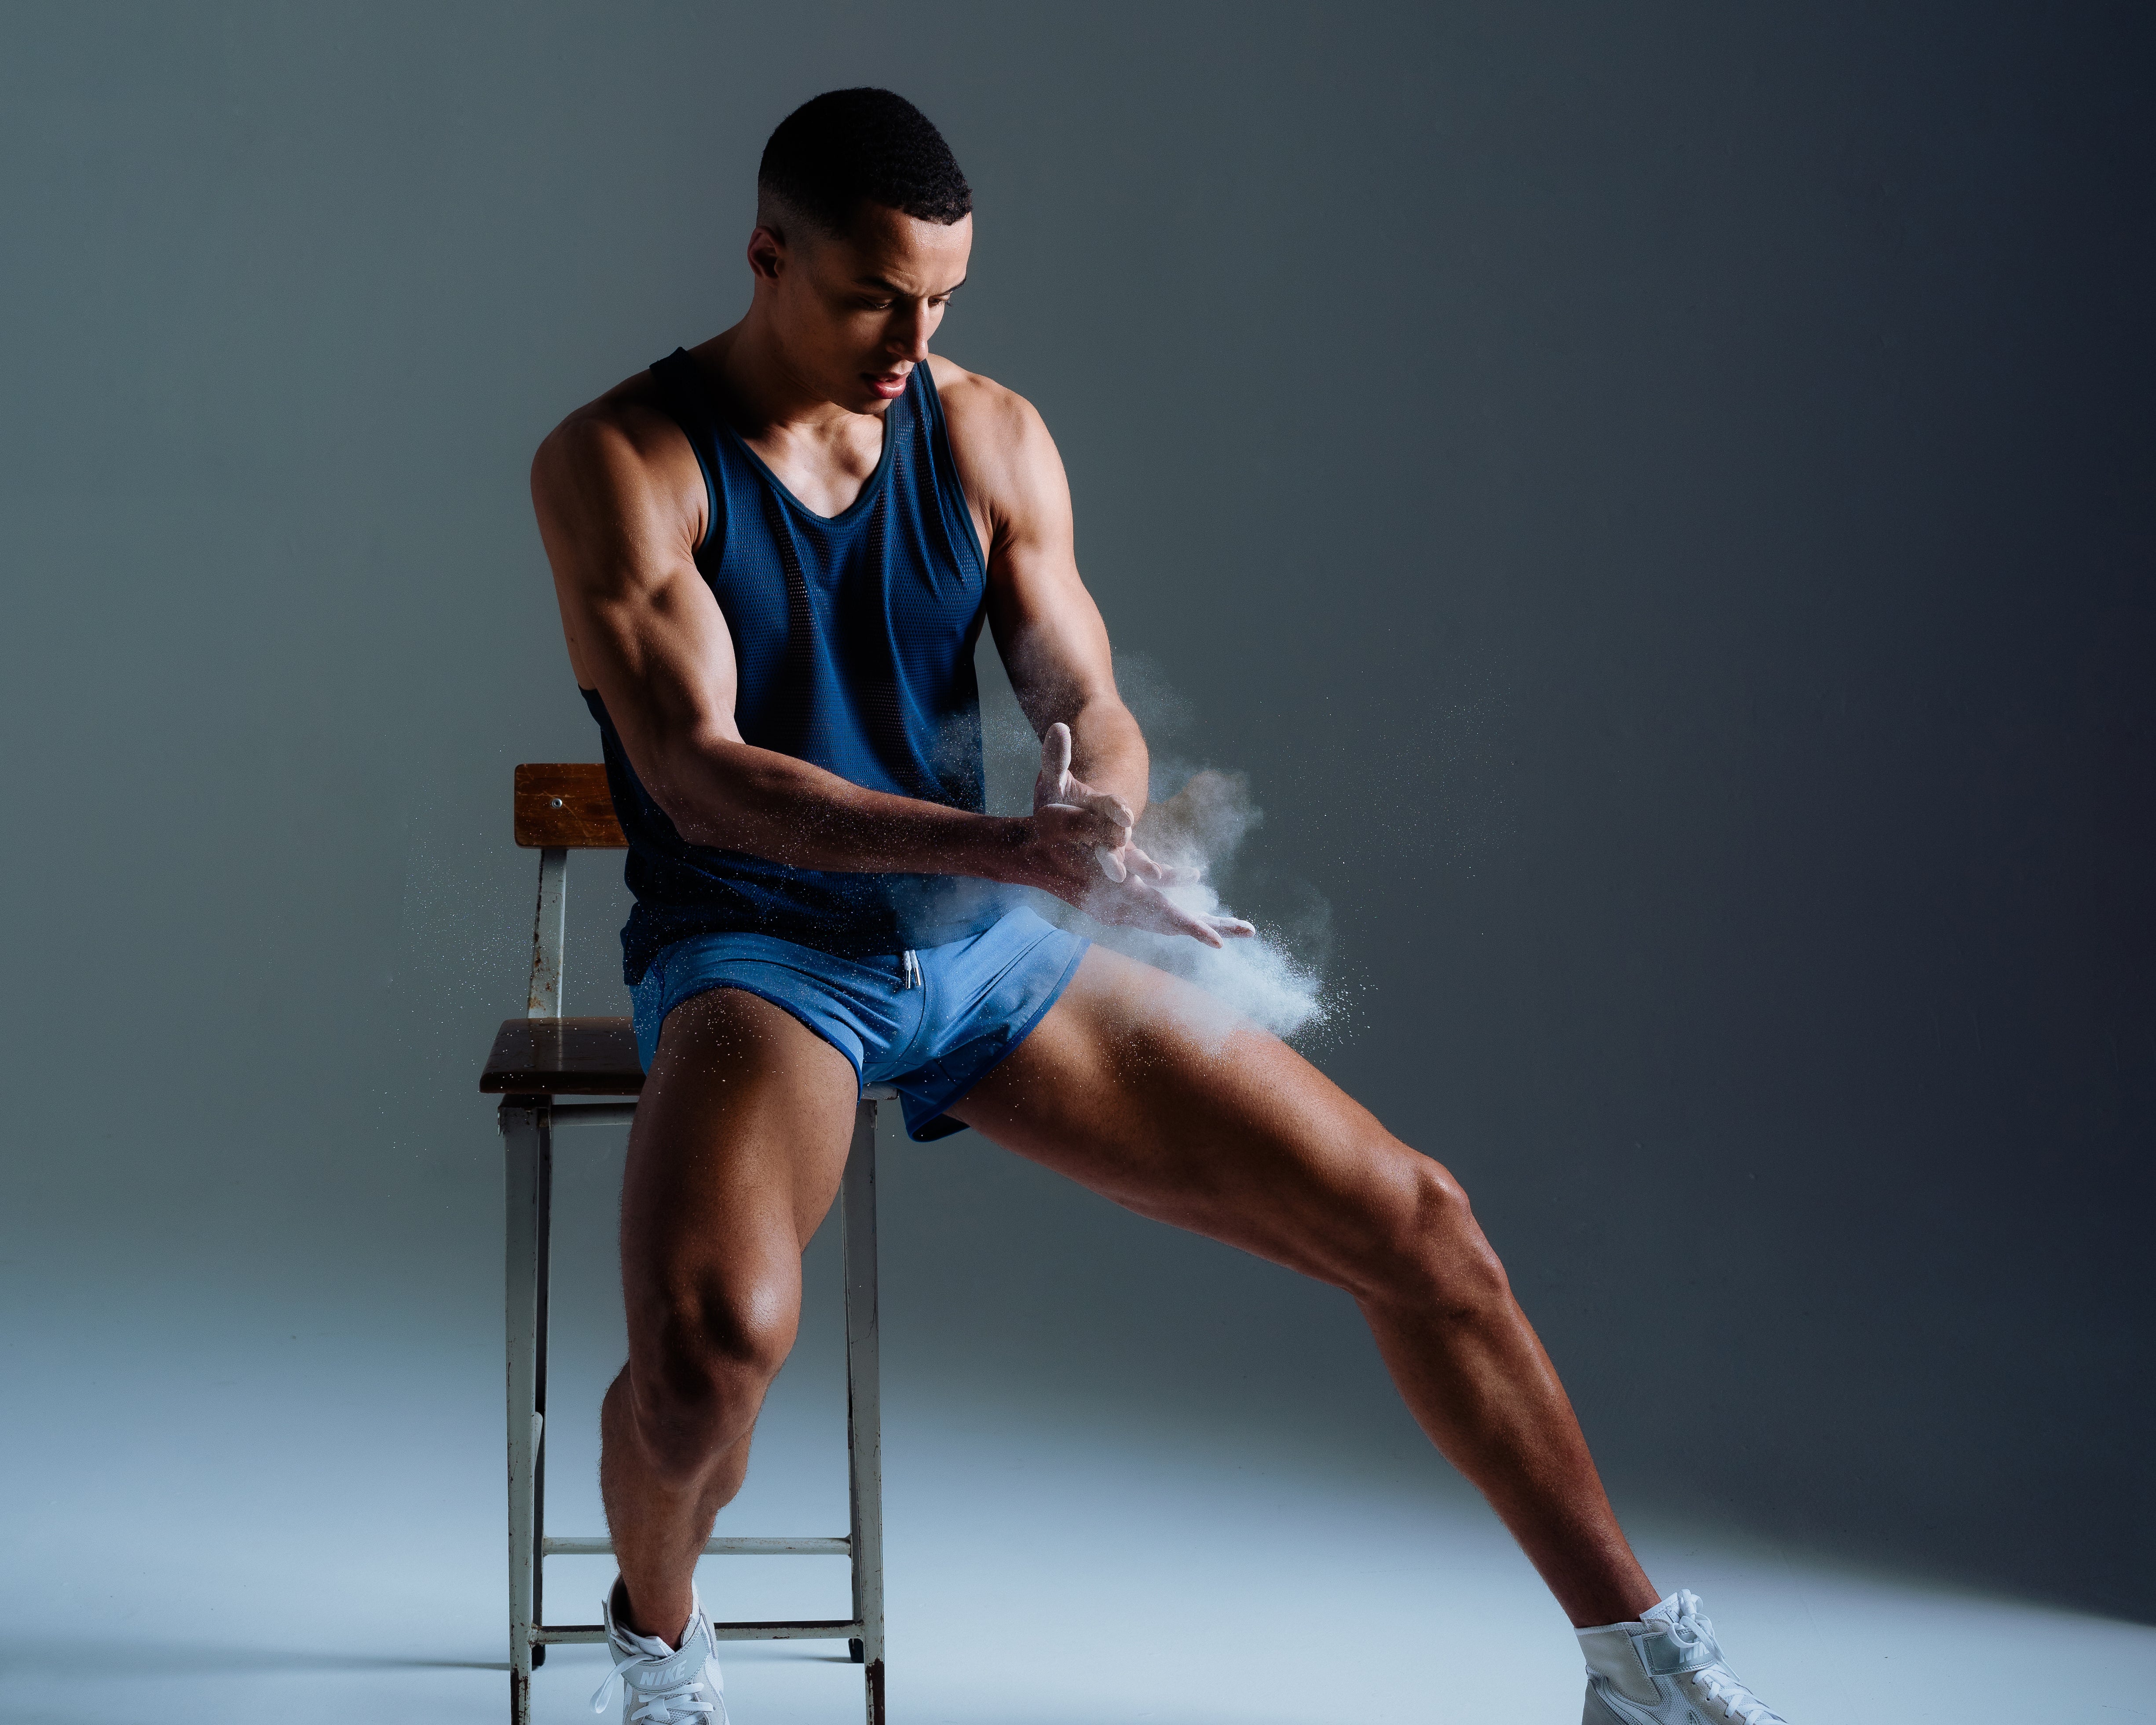 Parke & Ronen Actionwear campaign image. Male model is seated wearing mesh tank and action runner shorts.